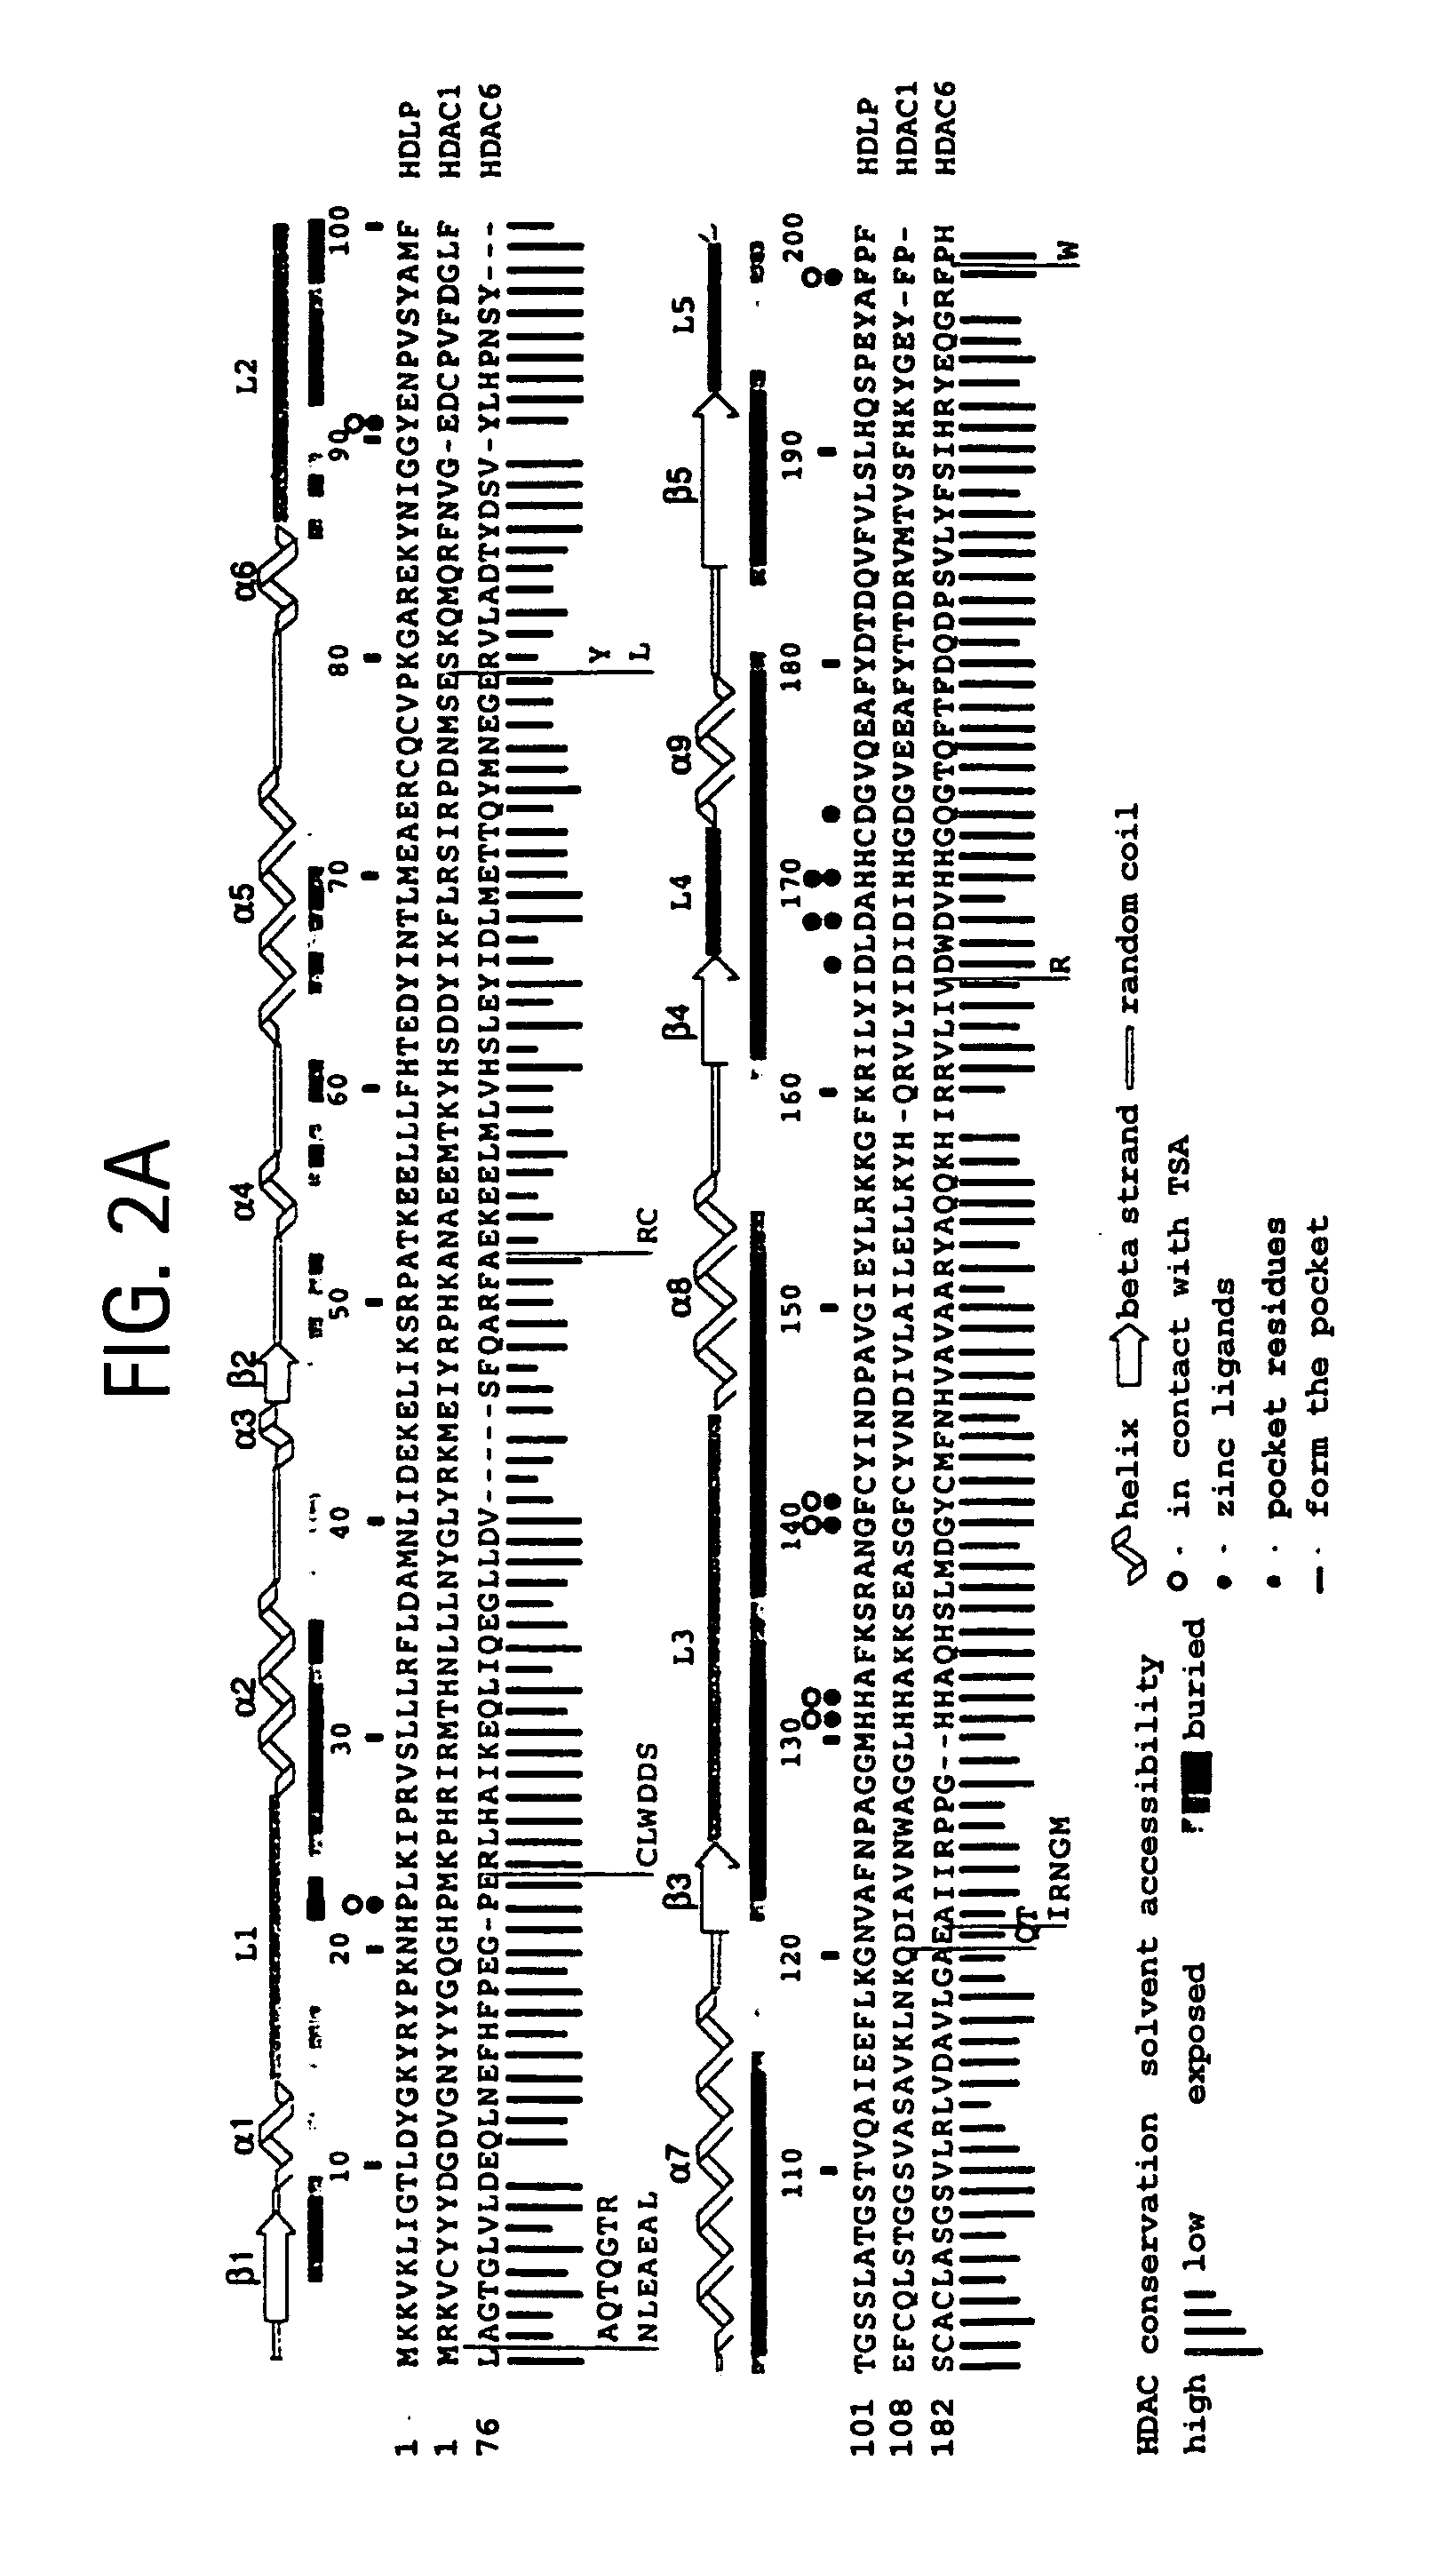 Crystal structure of a deacetylase and inhibitors thereof